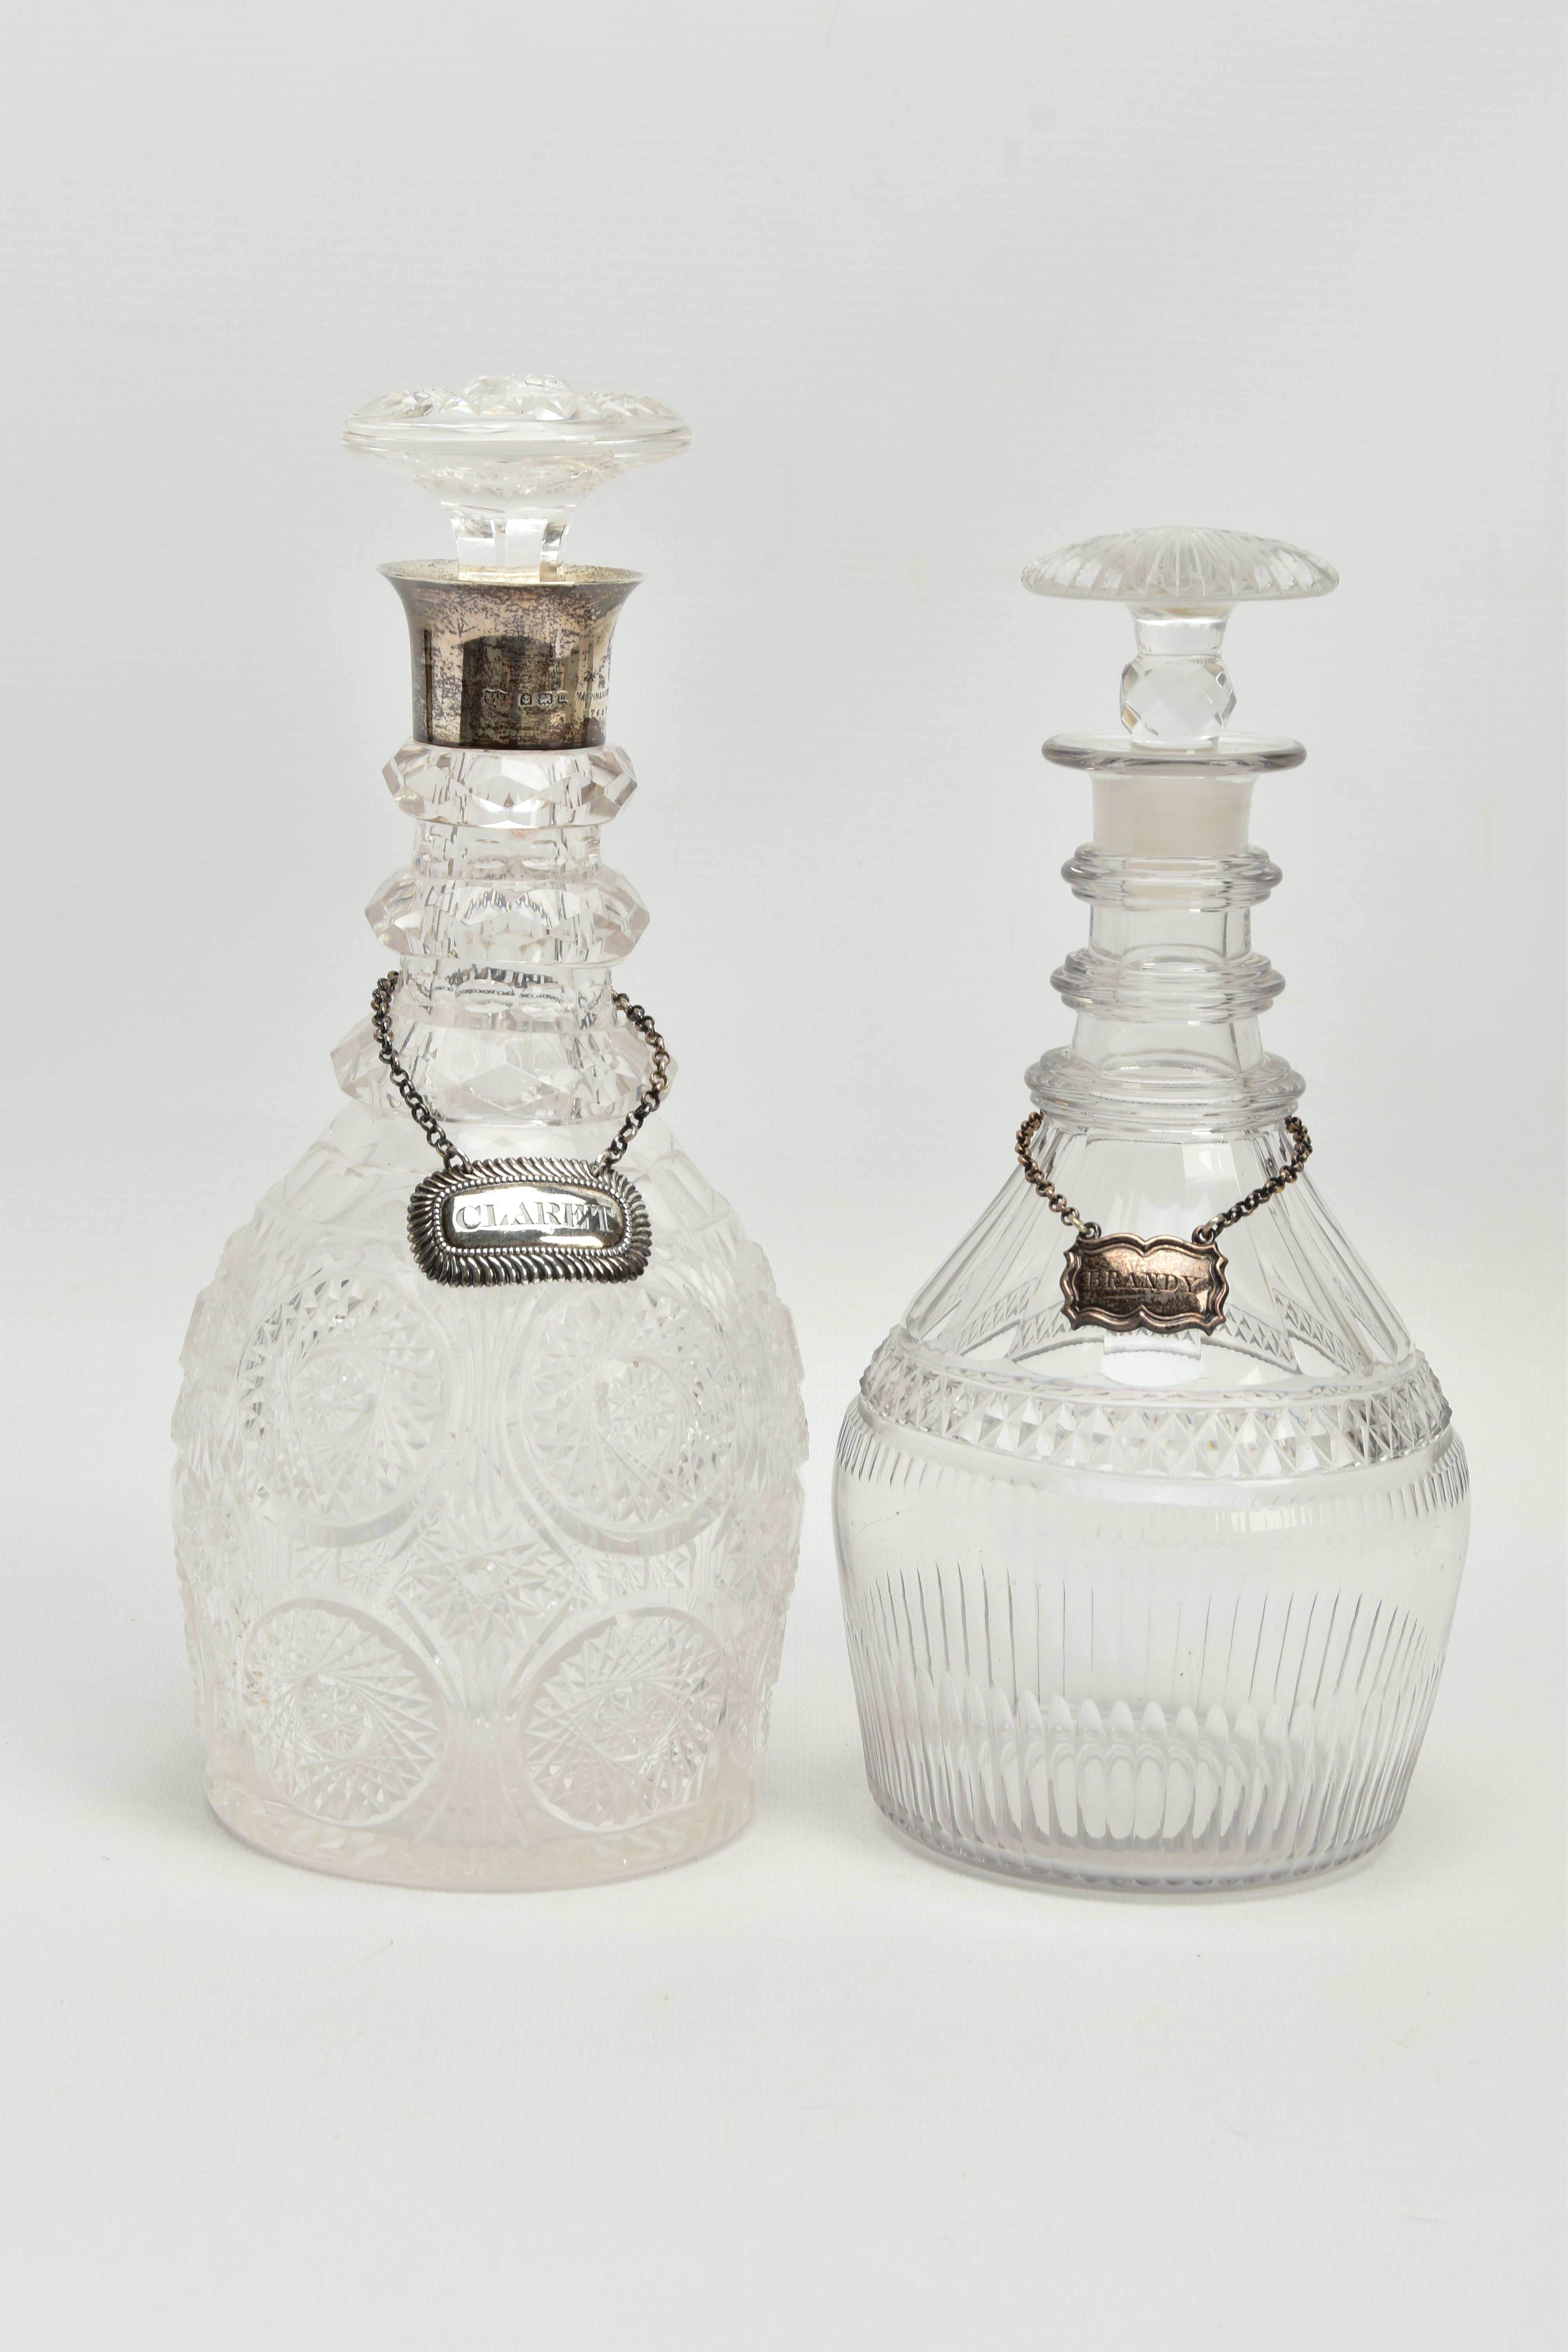 AN EARLY 19TH CENTURY PRUSSIAN SHAPED GLASS DECANTER AND A GEORGE V GLASS DECANTER, the early 19th